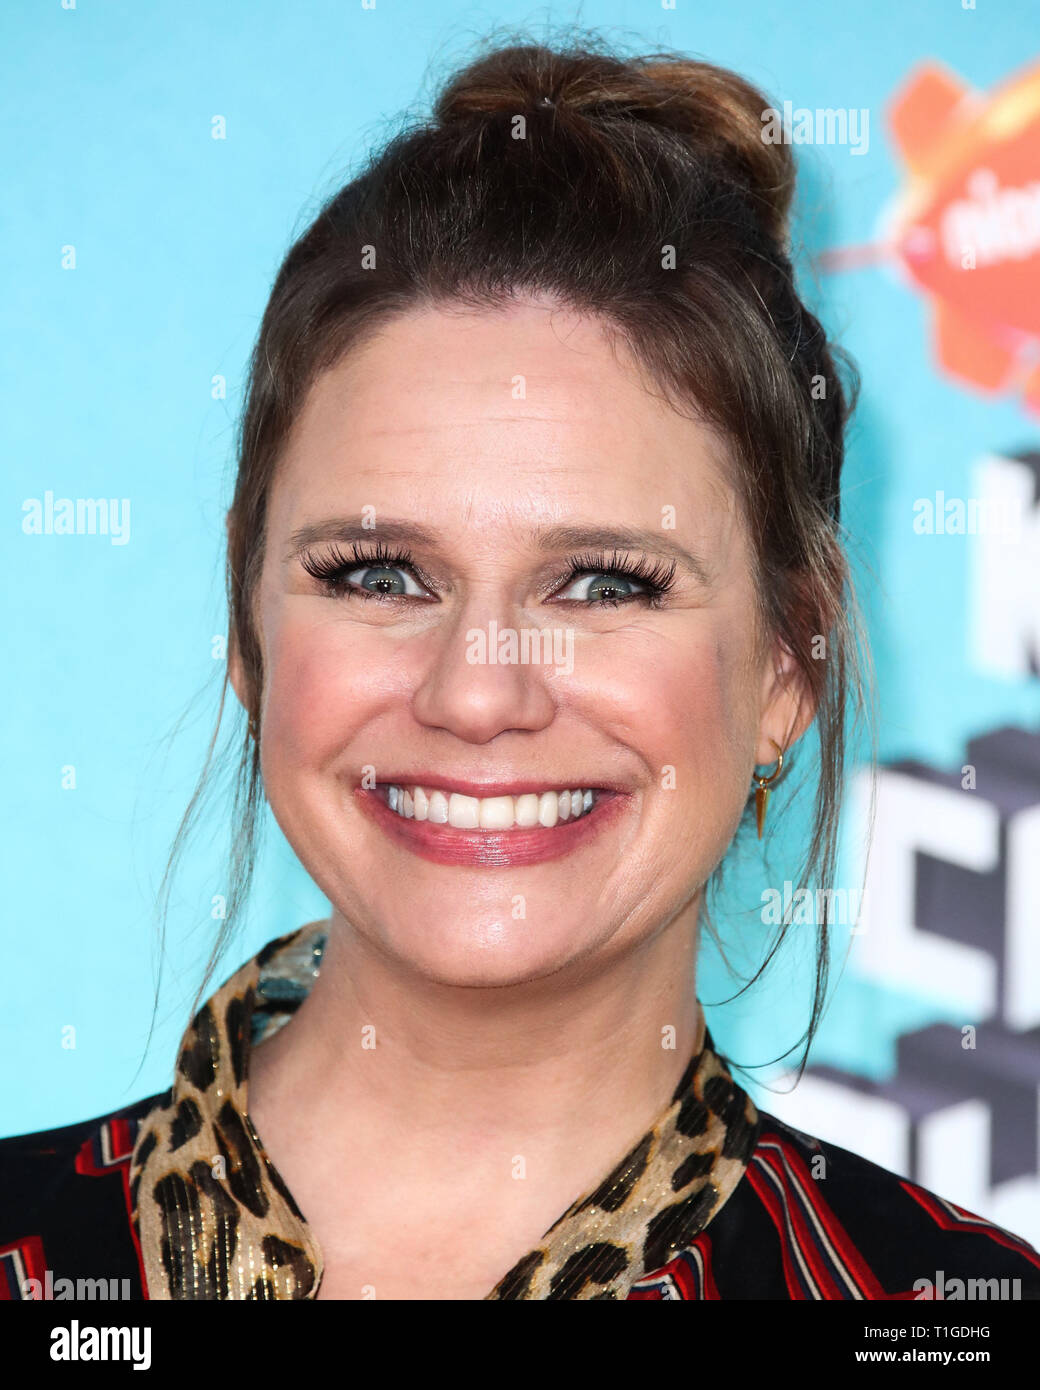 LOS ANGELES, CA, USA - MARCH 23: Andrea Barber arrives at Nickelodeon's 2019 Kids' Choice Awards held at the USC Galen Center on March 23, 2019 in Los Angeles, California, United States. (Photo by Xavier Collin/Image Press Agency) Stock Photo